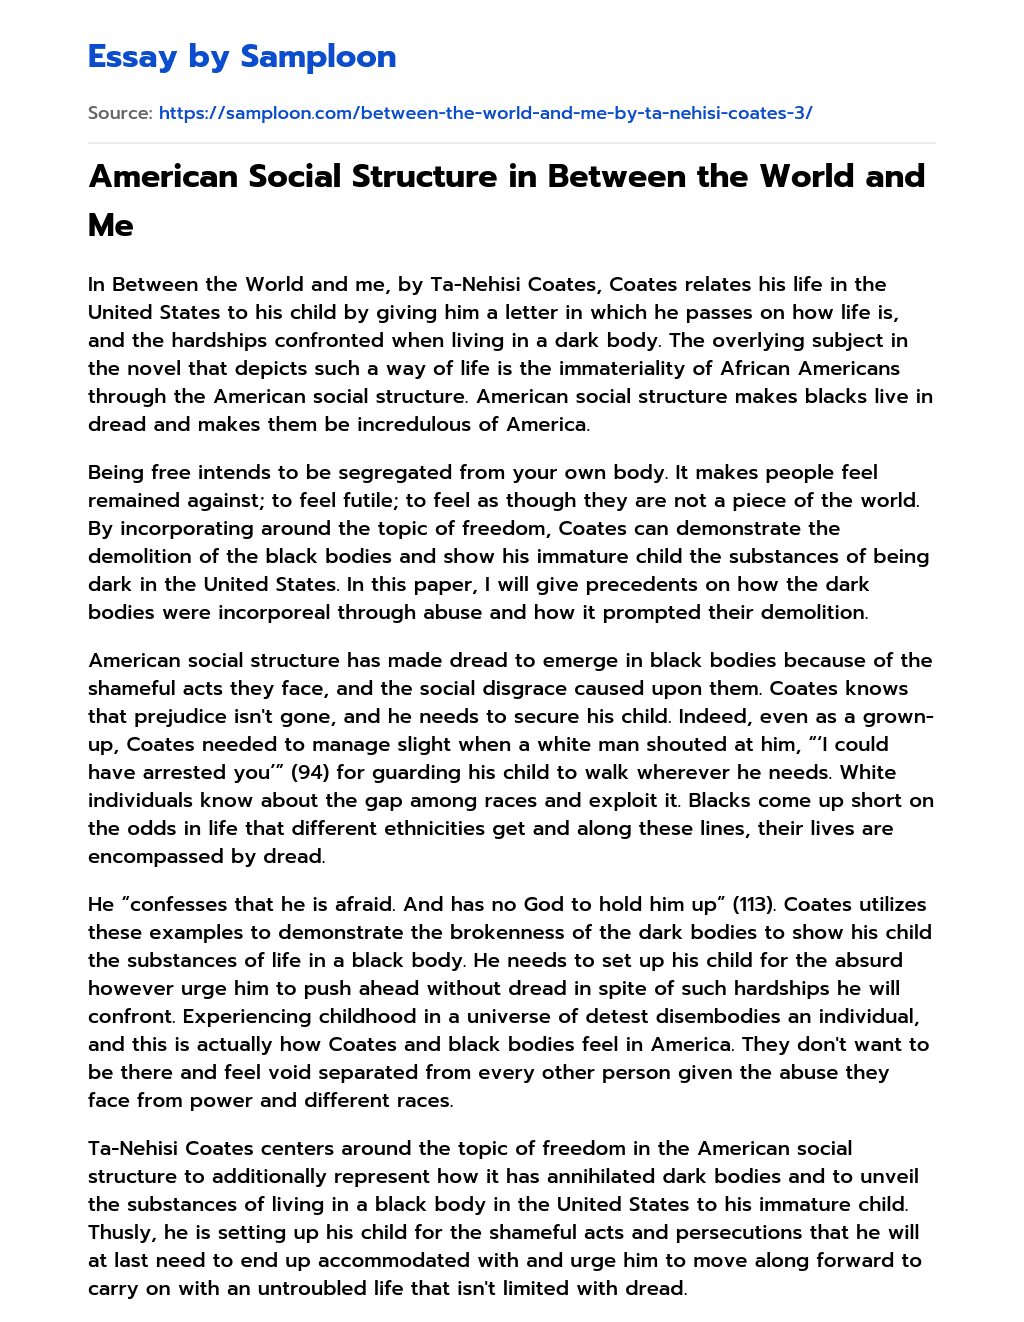 American Social Structure in Between the World and Me essay